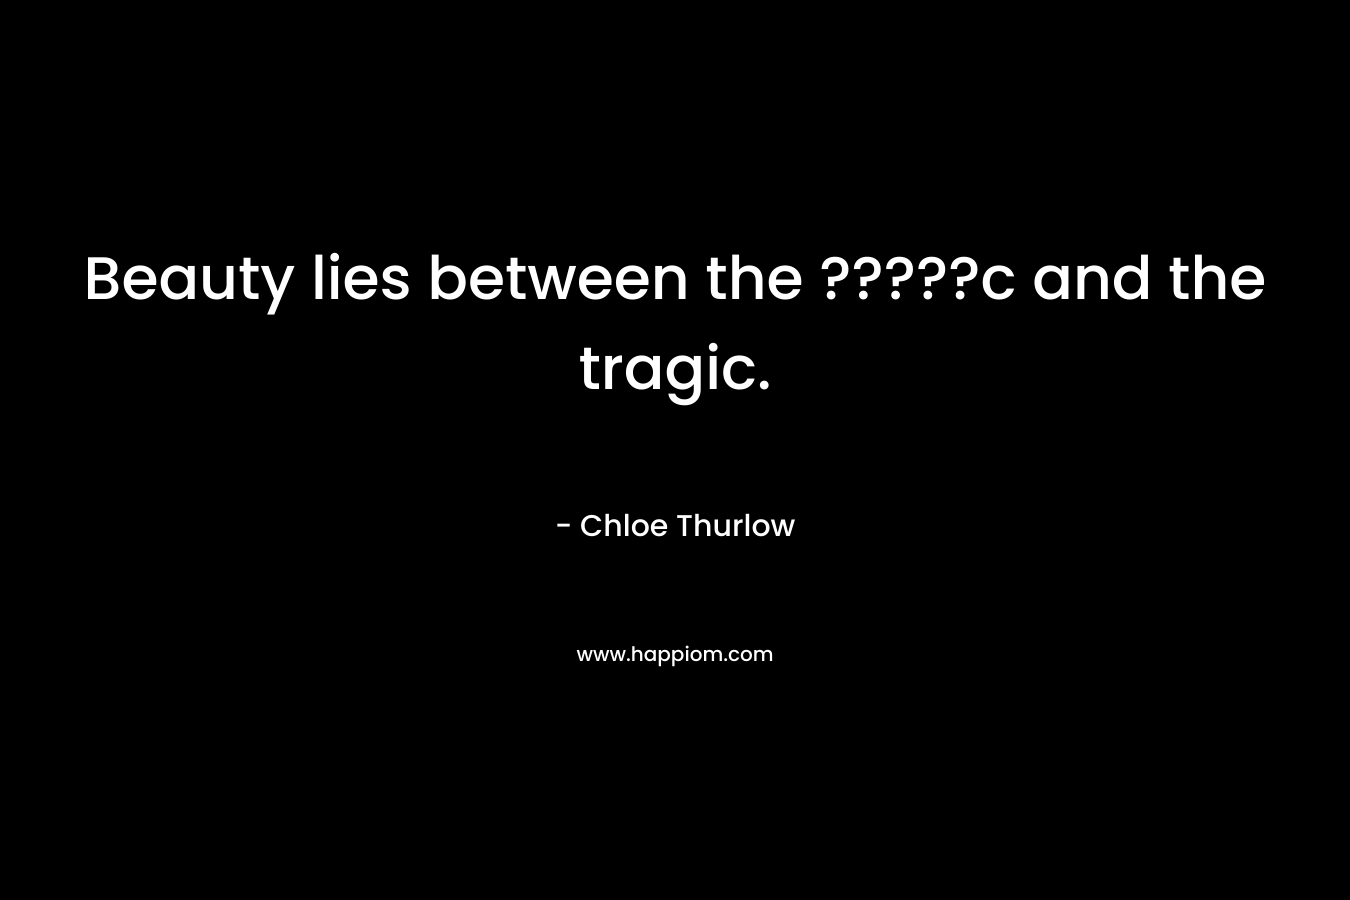 Beauty lies between the ?????c and the tragic. – Chloe Thurlow